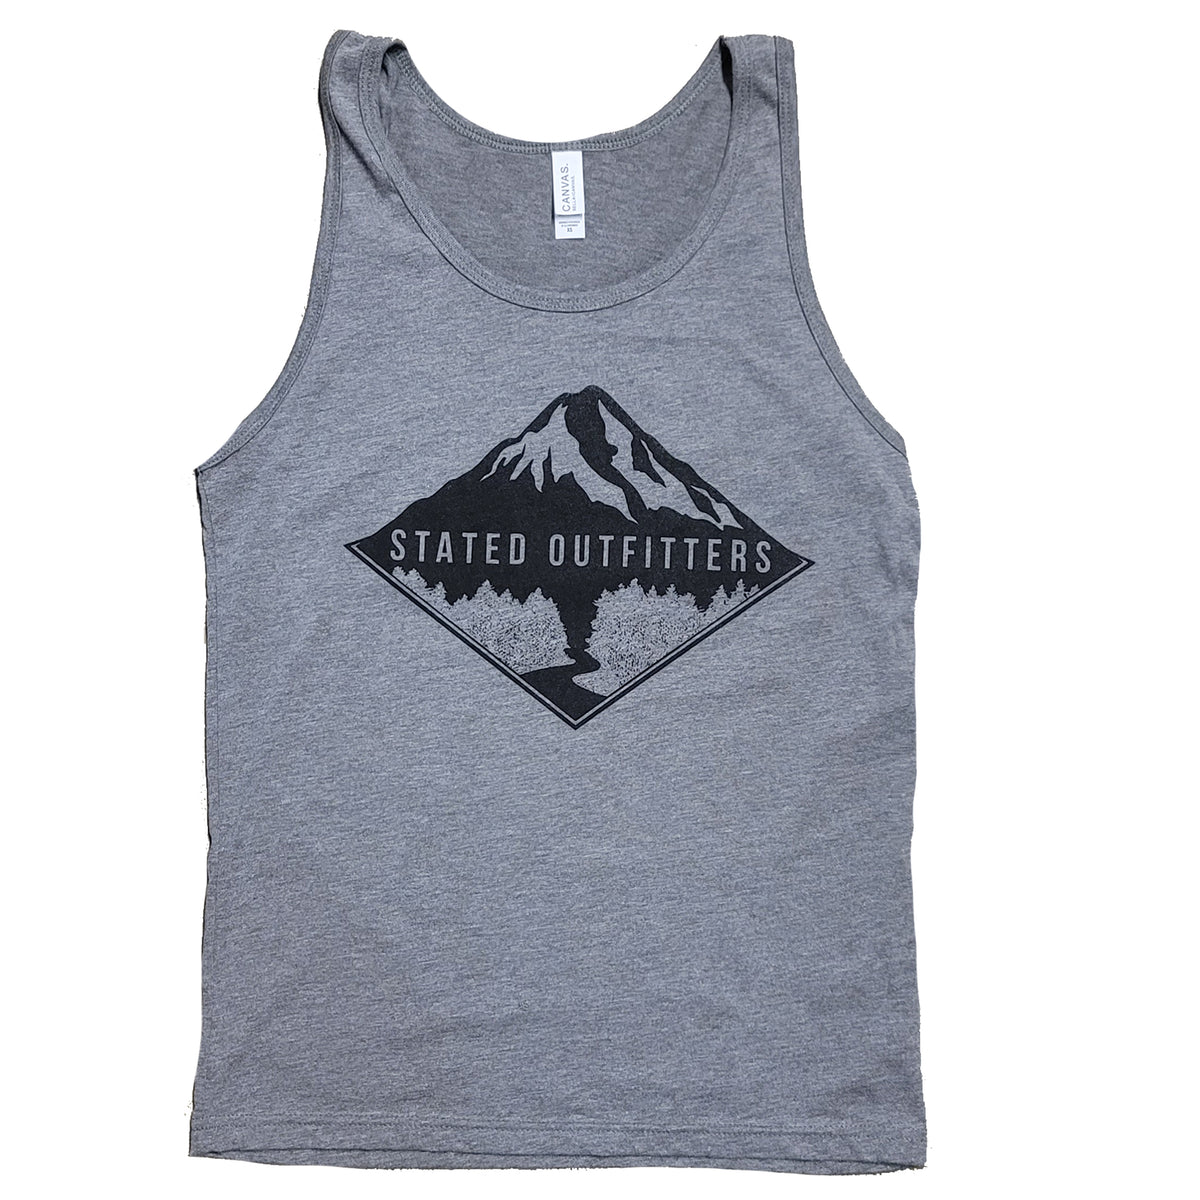 Stated Outfitters Diamond Tank